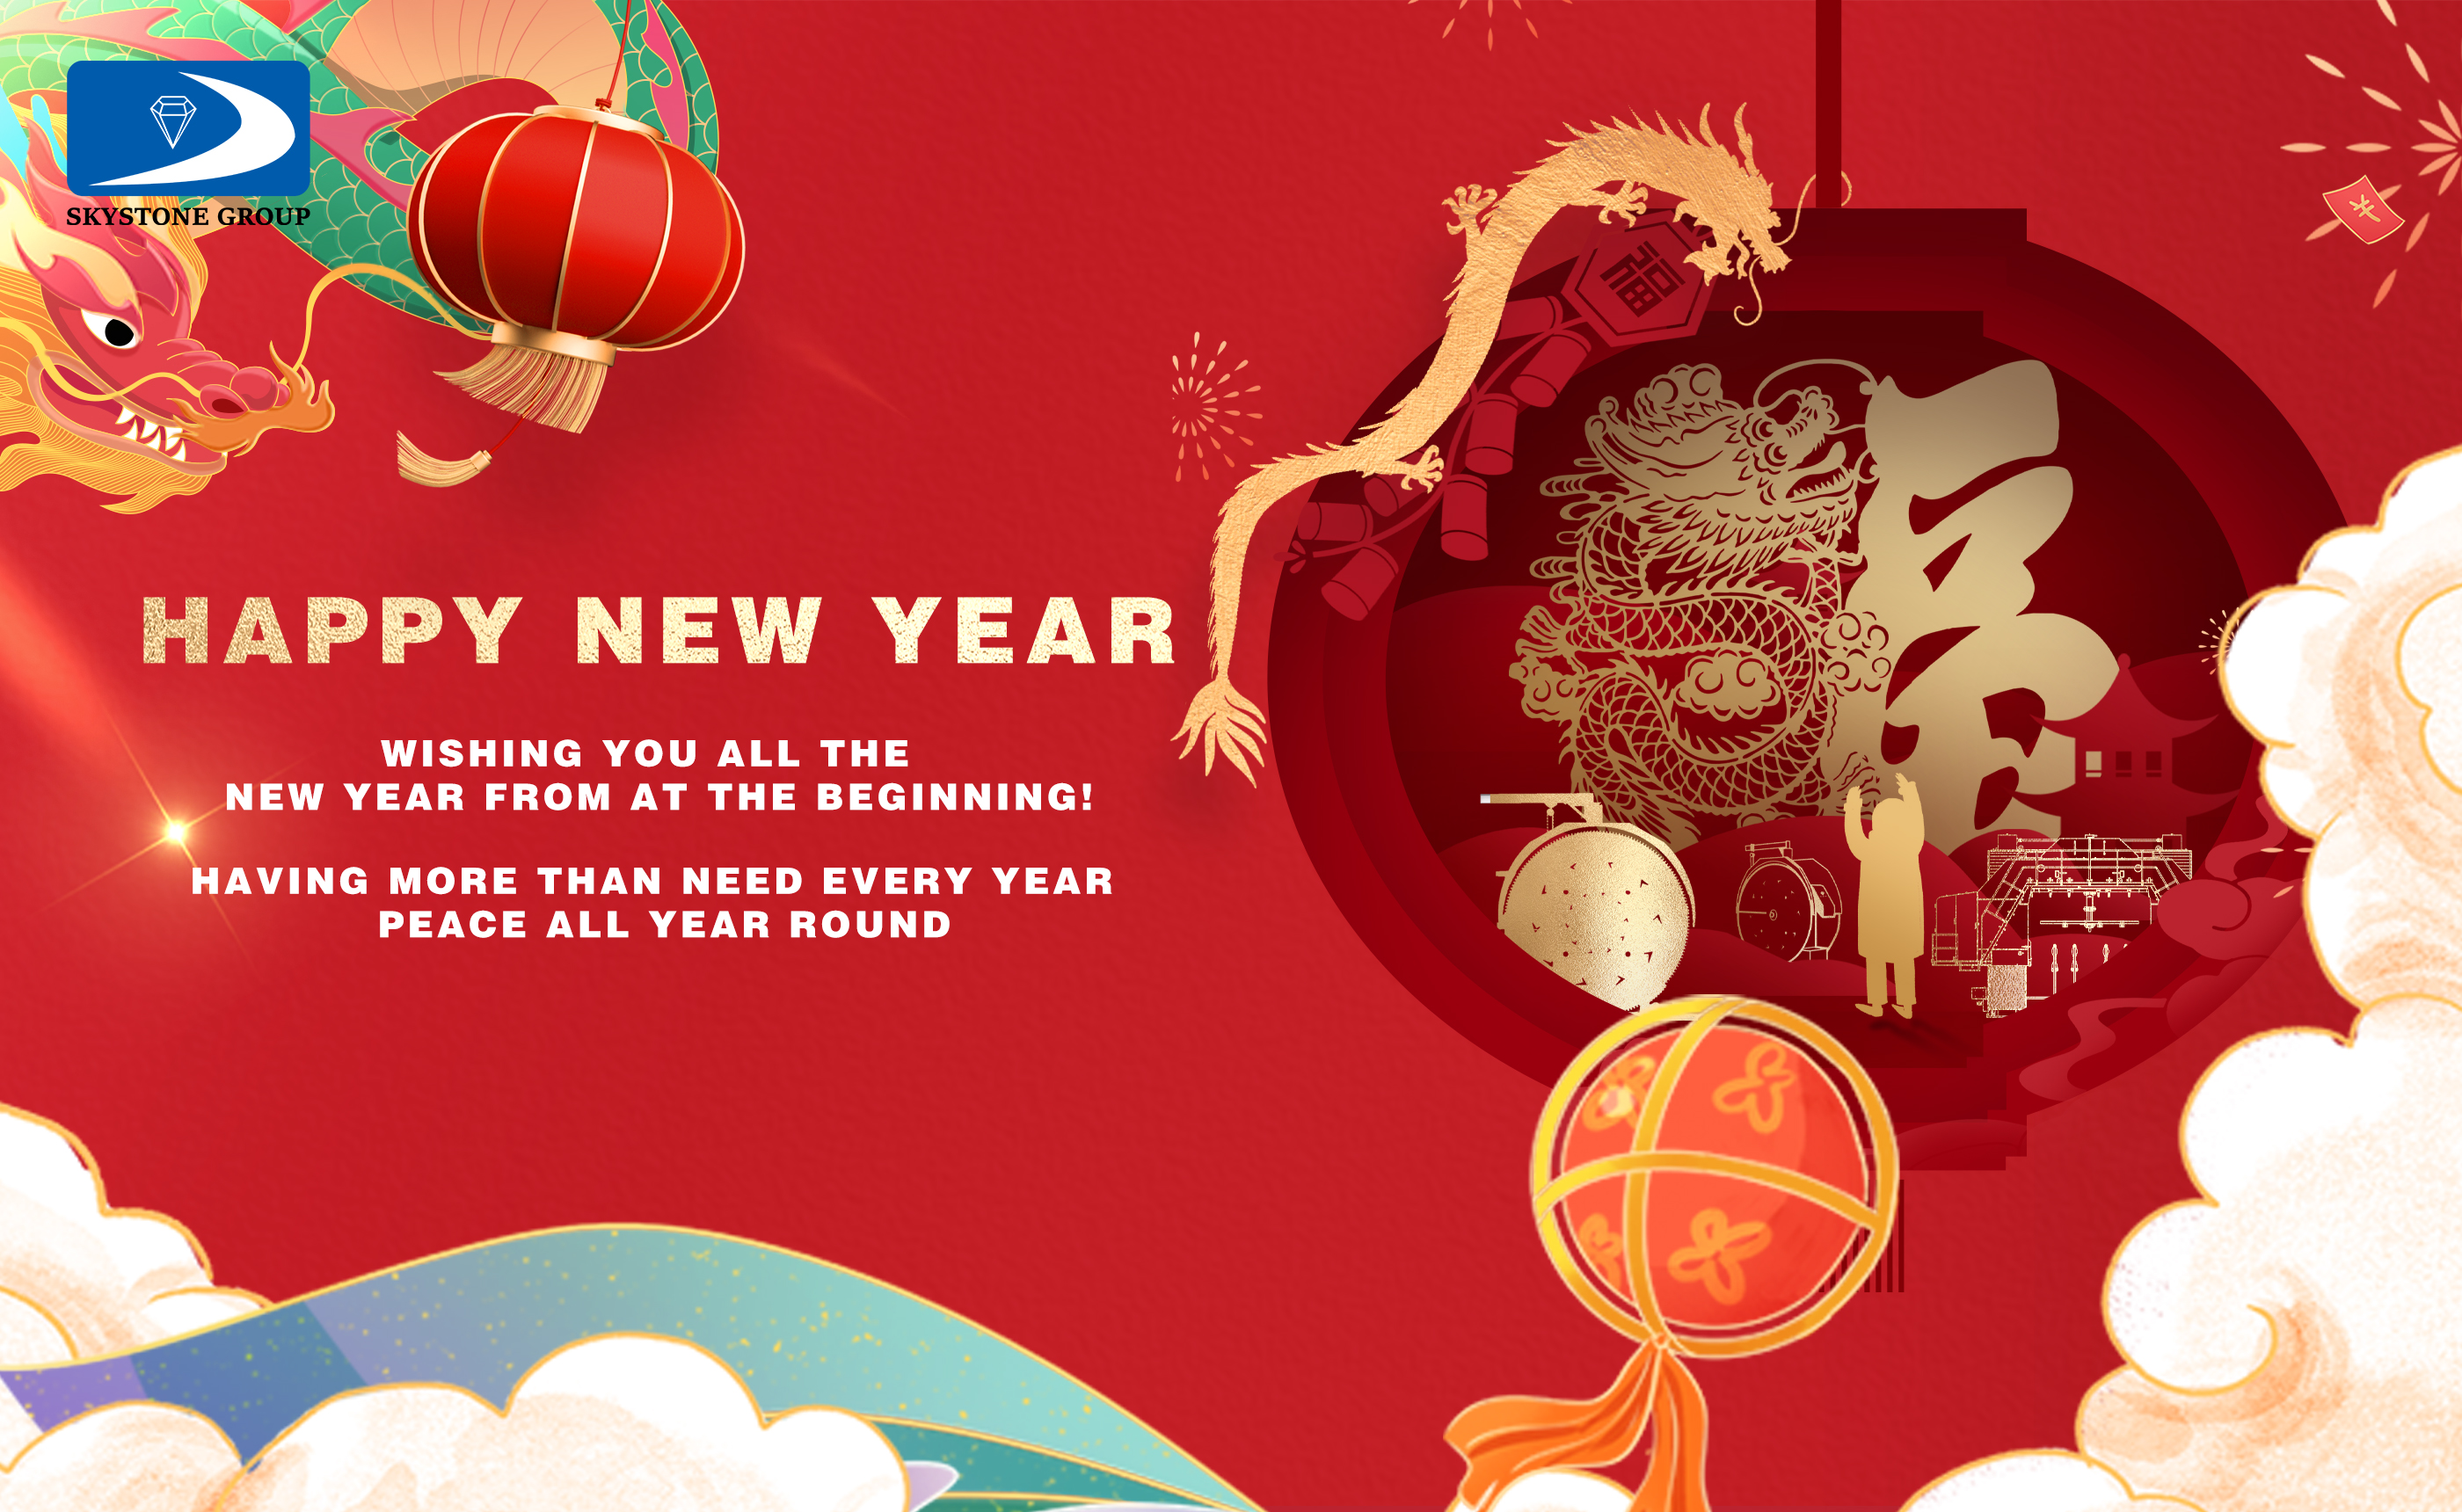 Skystone wish you and your family happy Chinese new year!